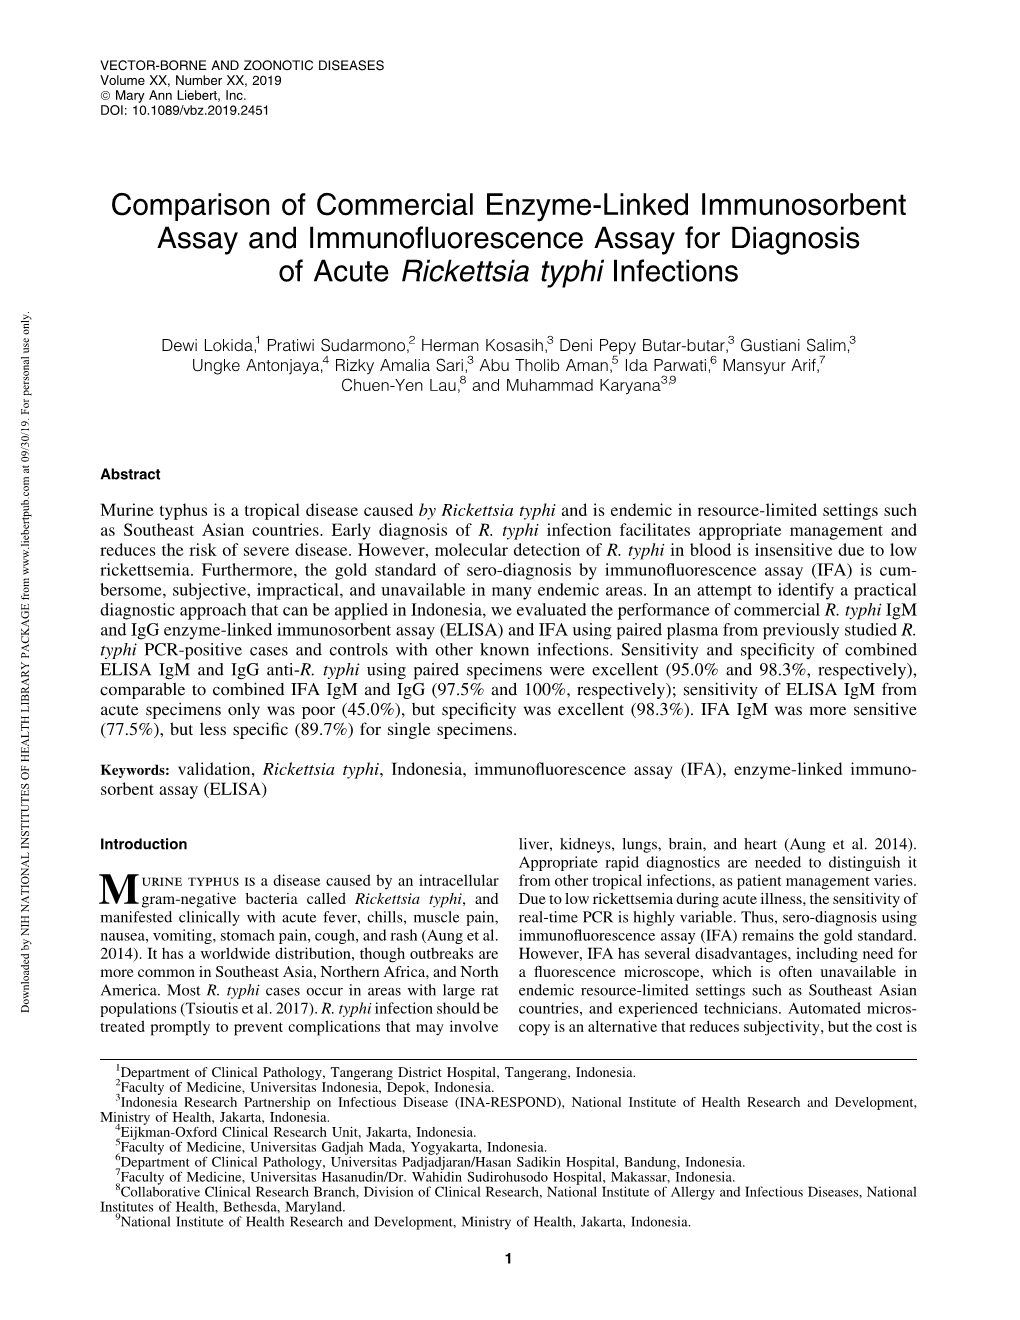 Comparison of Commercial Enzyme-Linked Immunosorbent Assay and Immunoﬂuorescence Assay for Diagnosis of Acute Rickettsia Typhi Infections